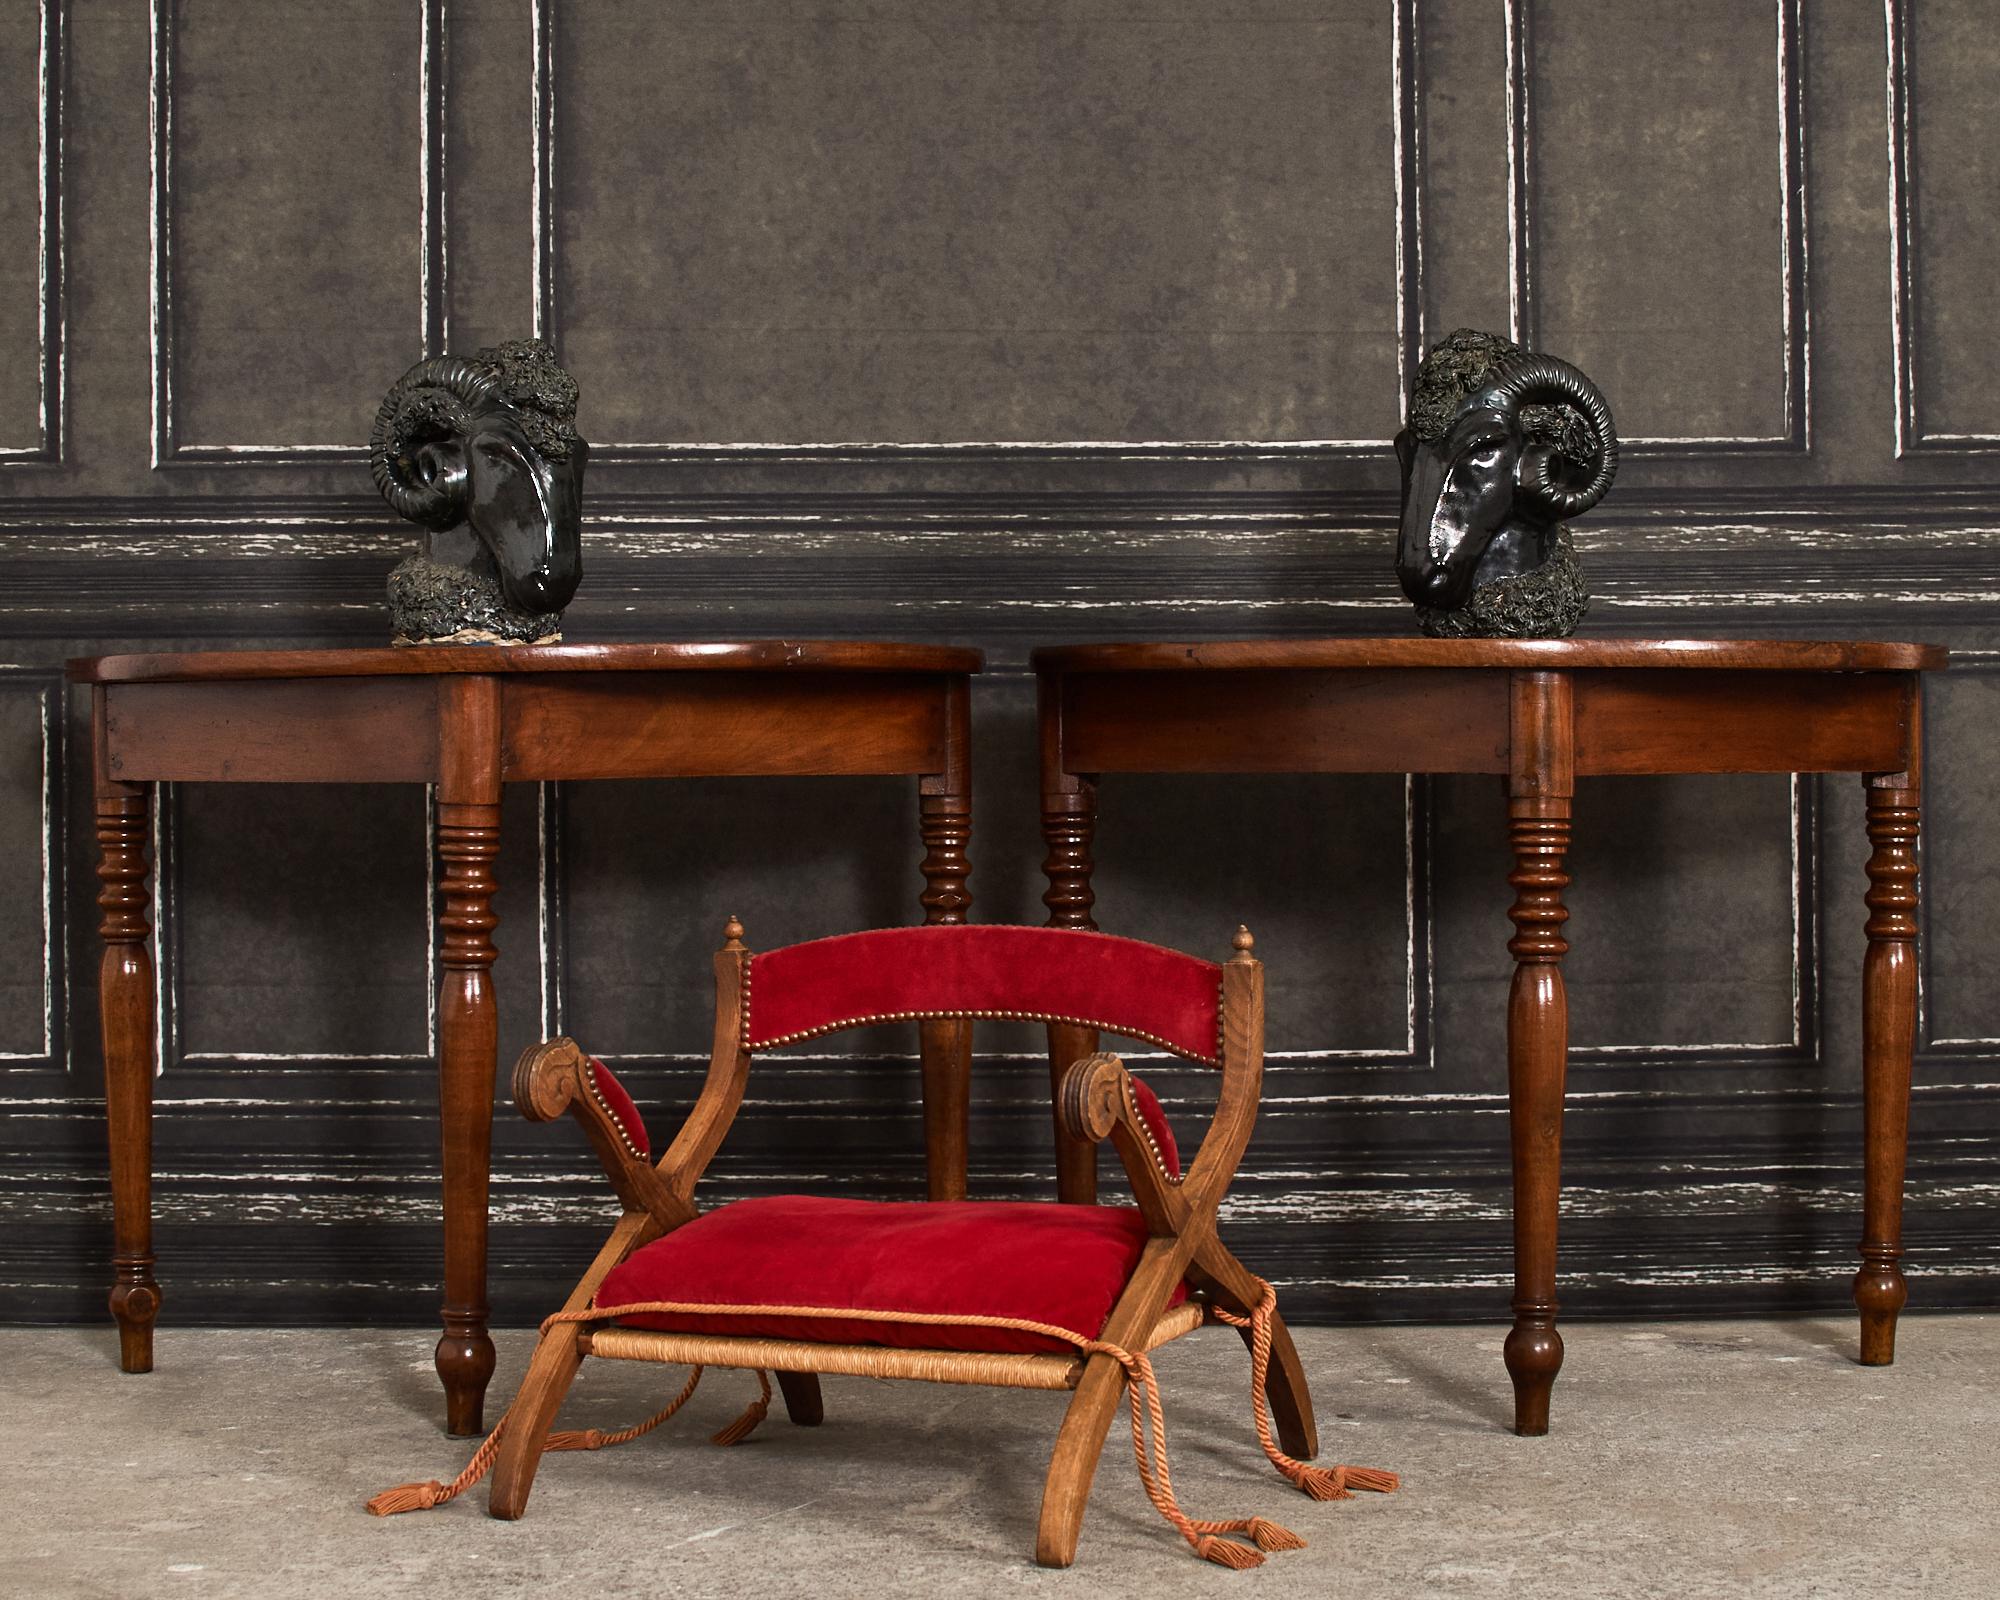 Diminutive camel or elephant saddle stool or armchair crafted from oak in the regency taste. The hardwood oak frame features an x-form curule leg construction. The arms have scrolled, reeded hands with padded rests. The gracefully curved back has